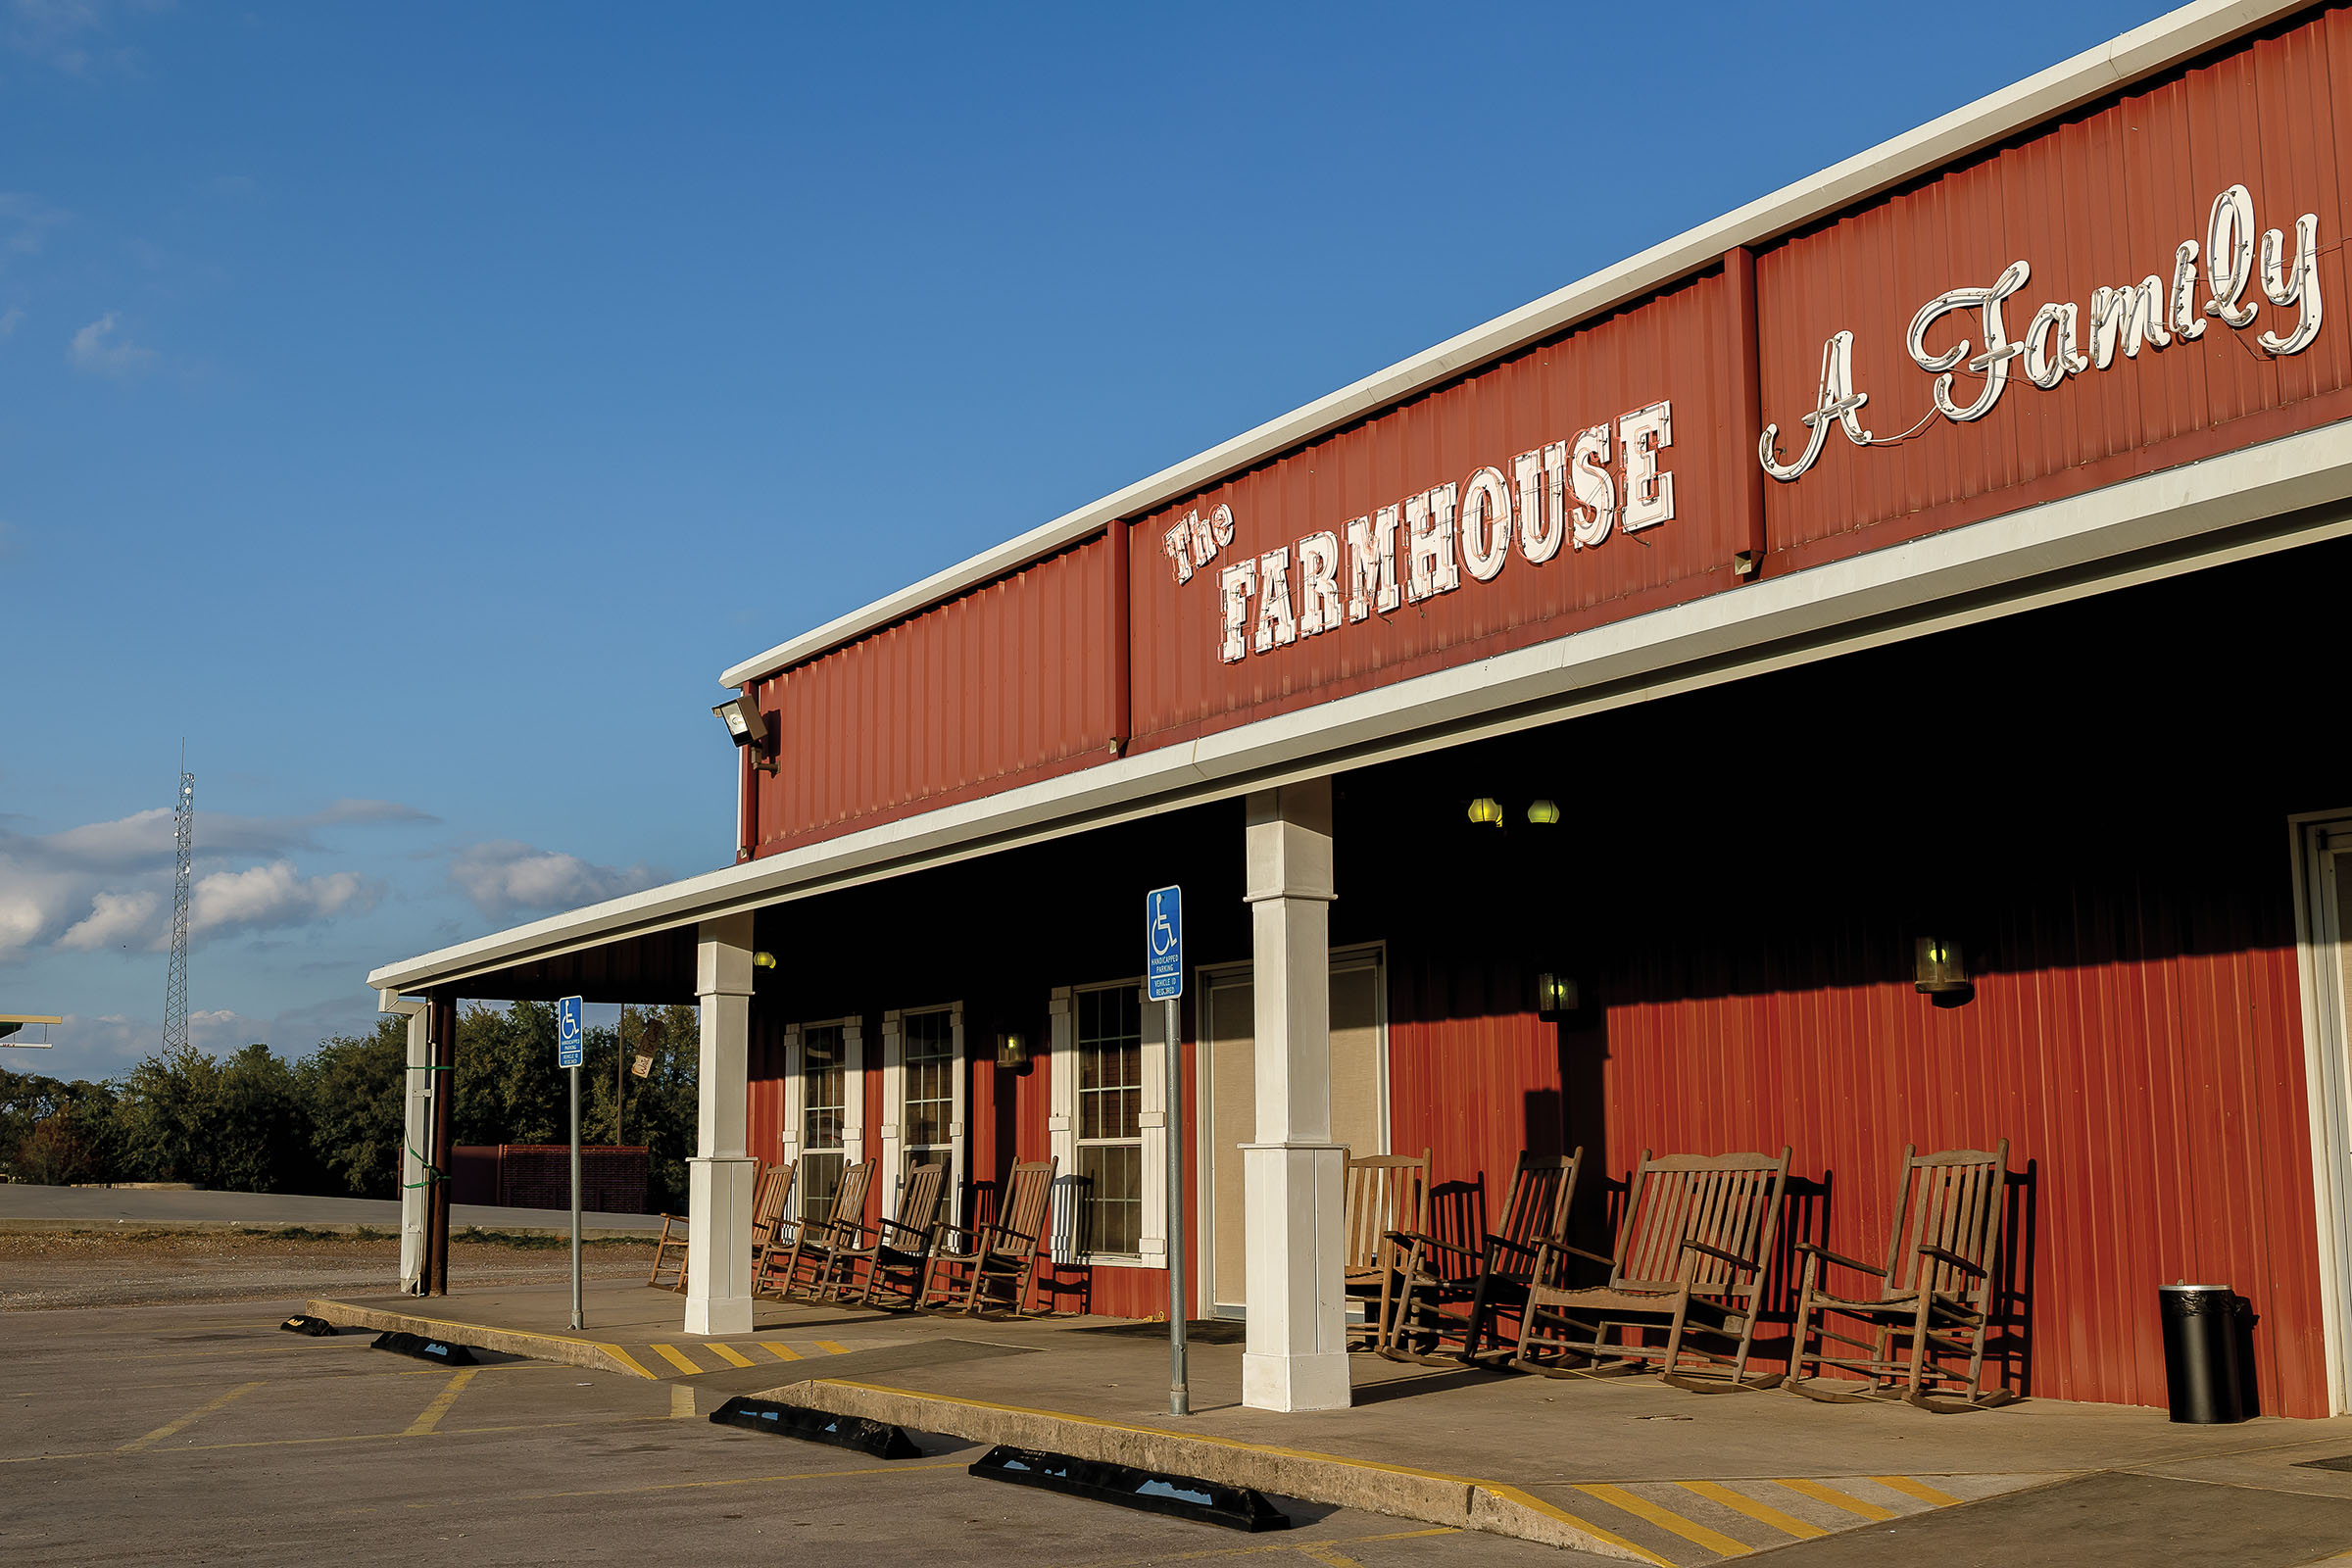 The exterior of a red restaurant with white text reading "The Farmhouse"